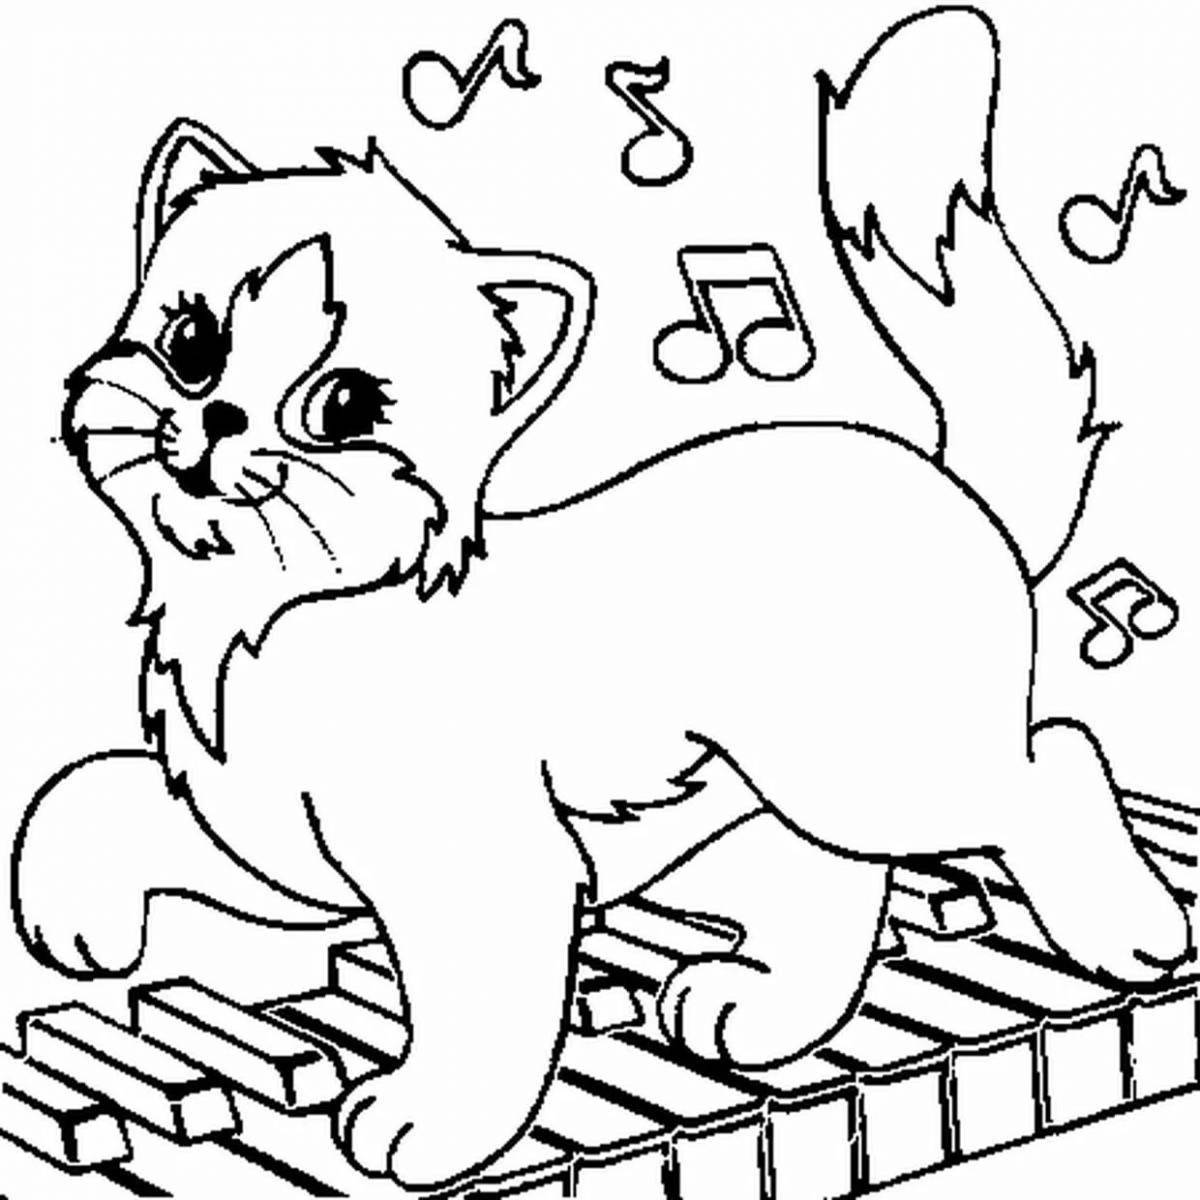 Coloring page adorable cat in a box